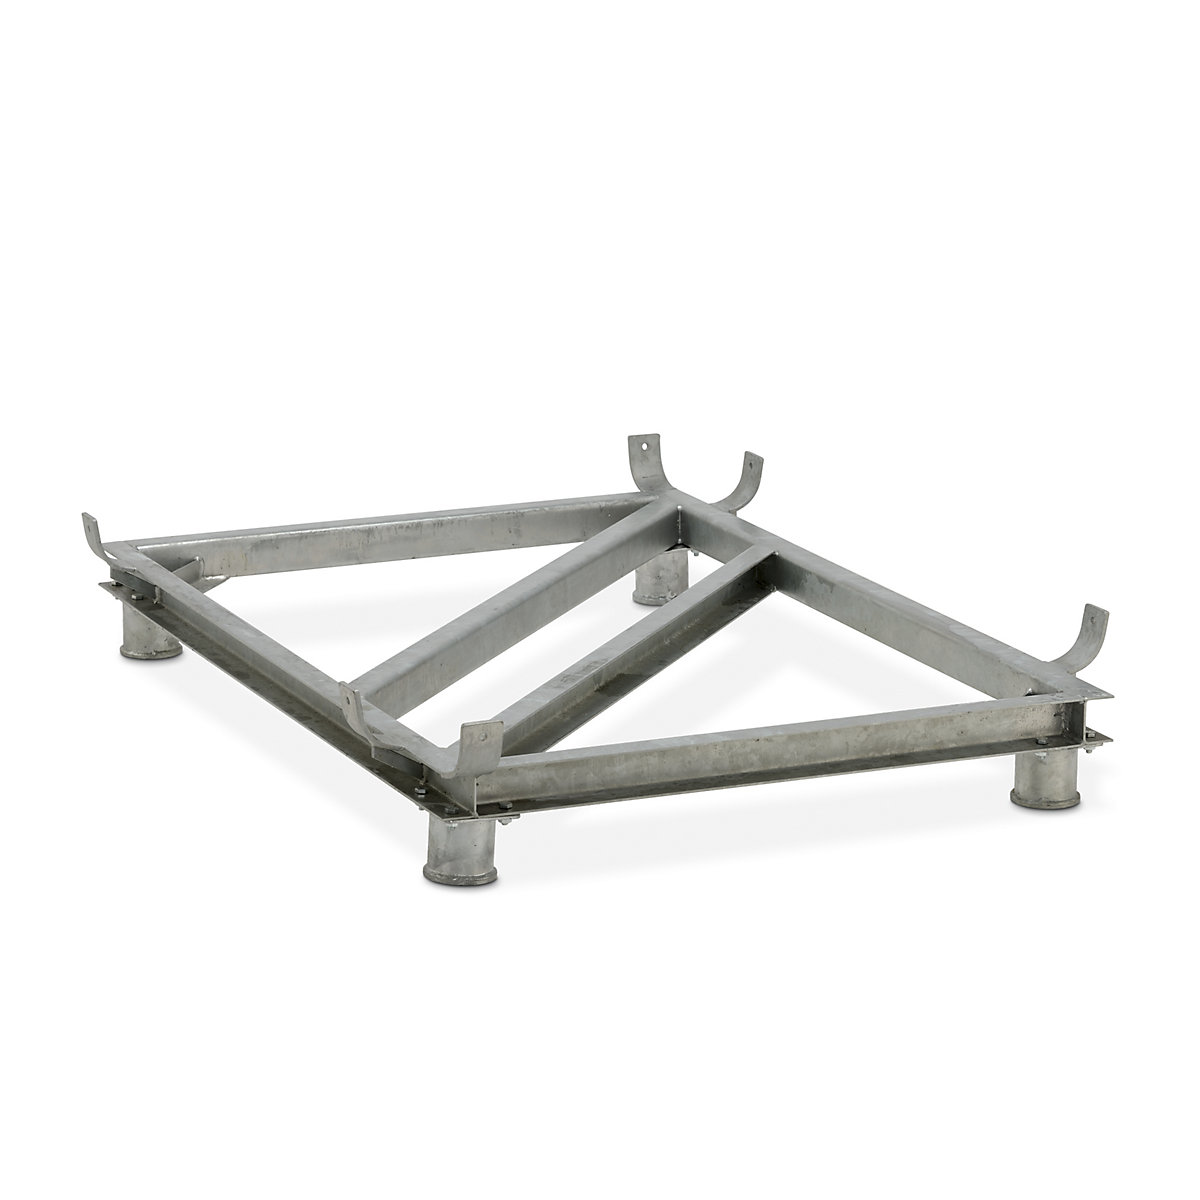 Steel base frame – CEMO, zinc plated, for LxW 1820 x 1390 mm, capacity 1500 litres